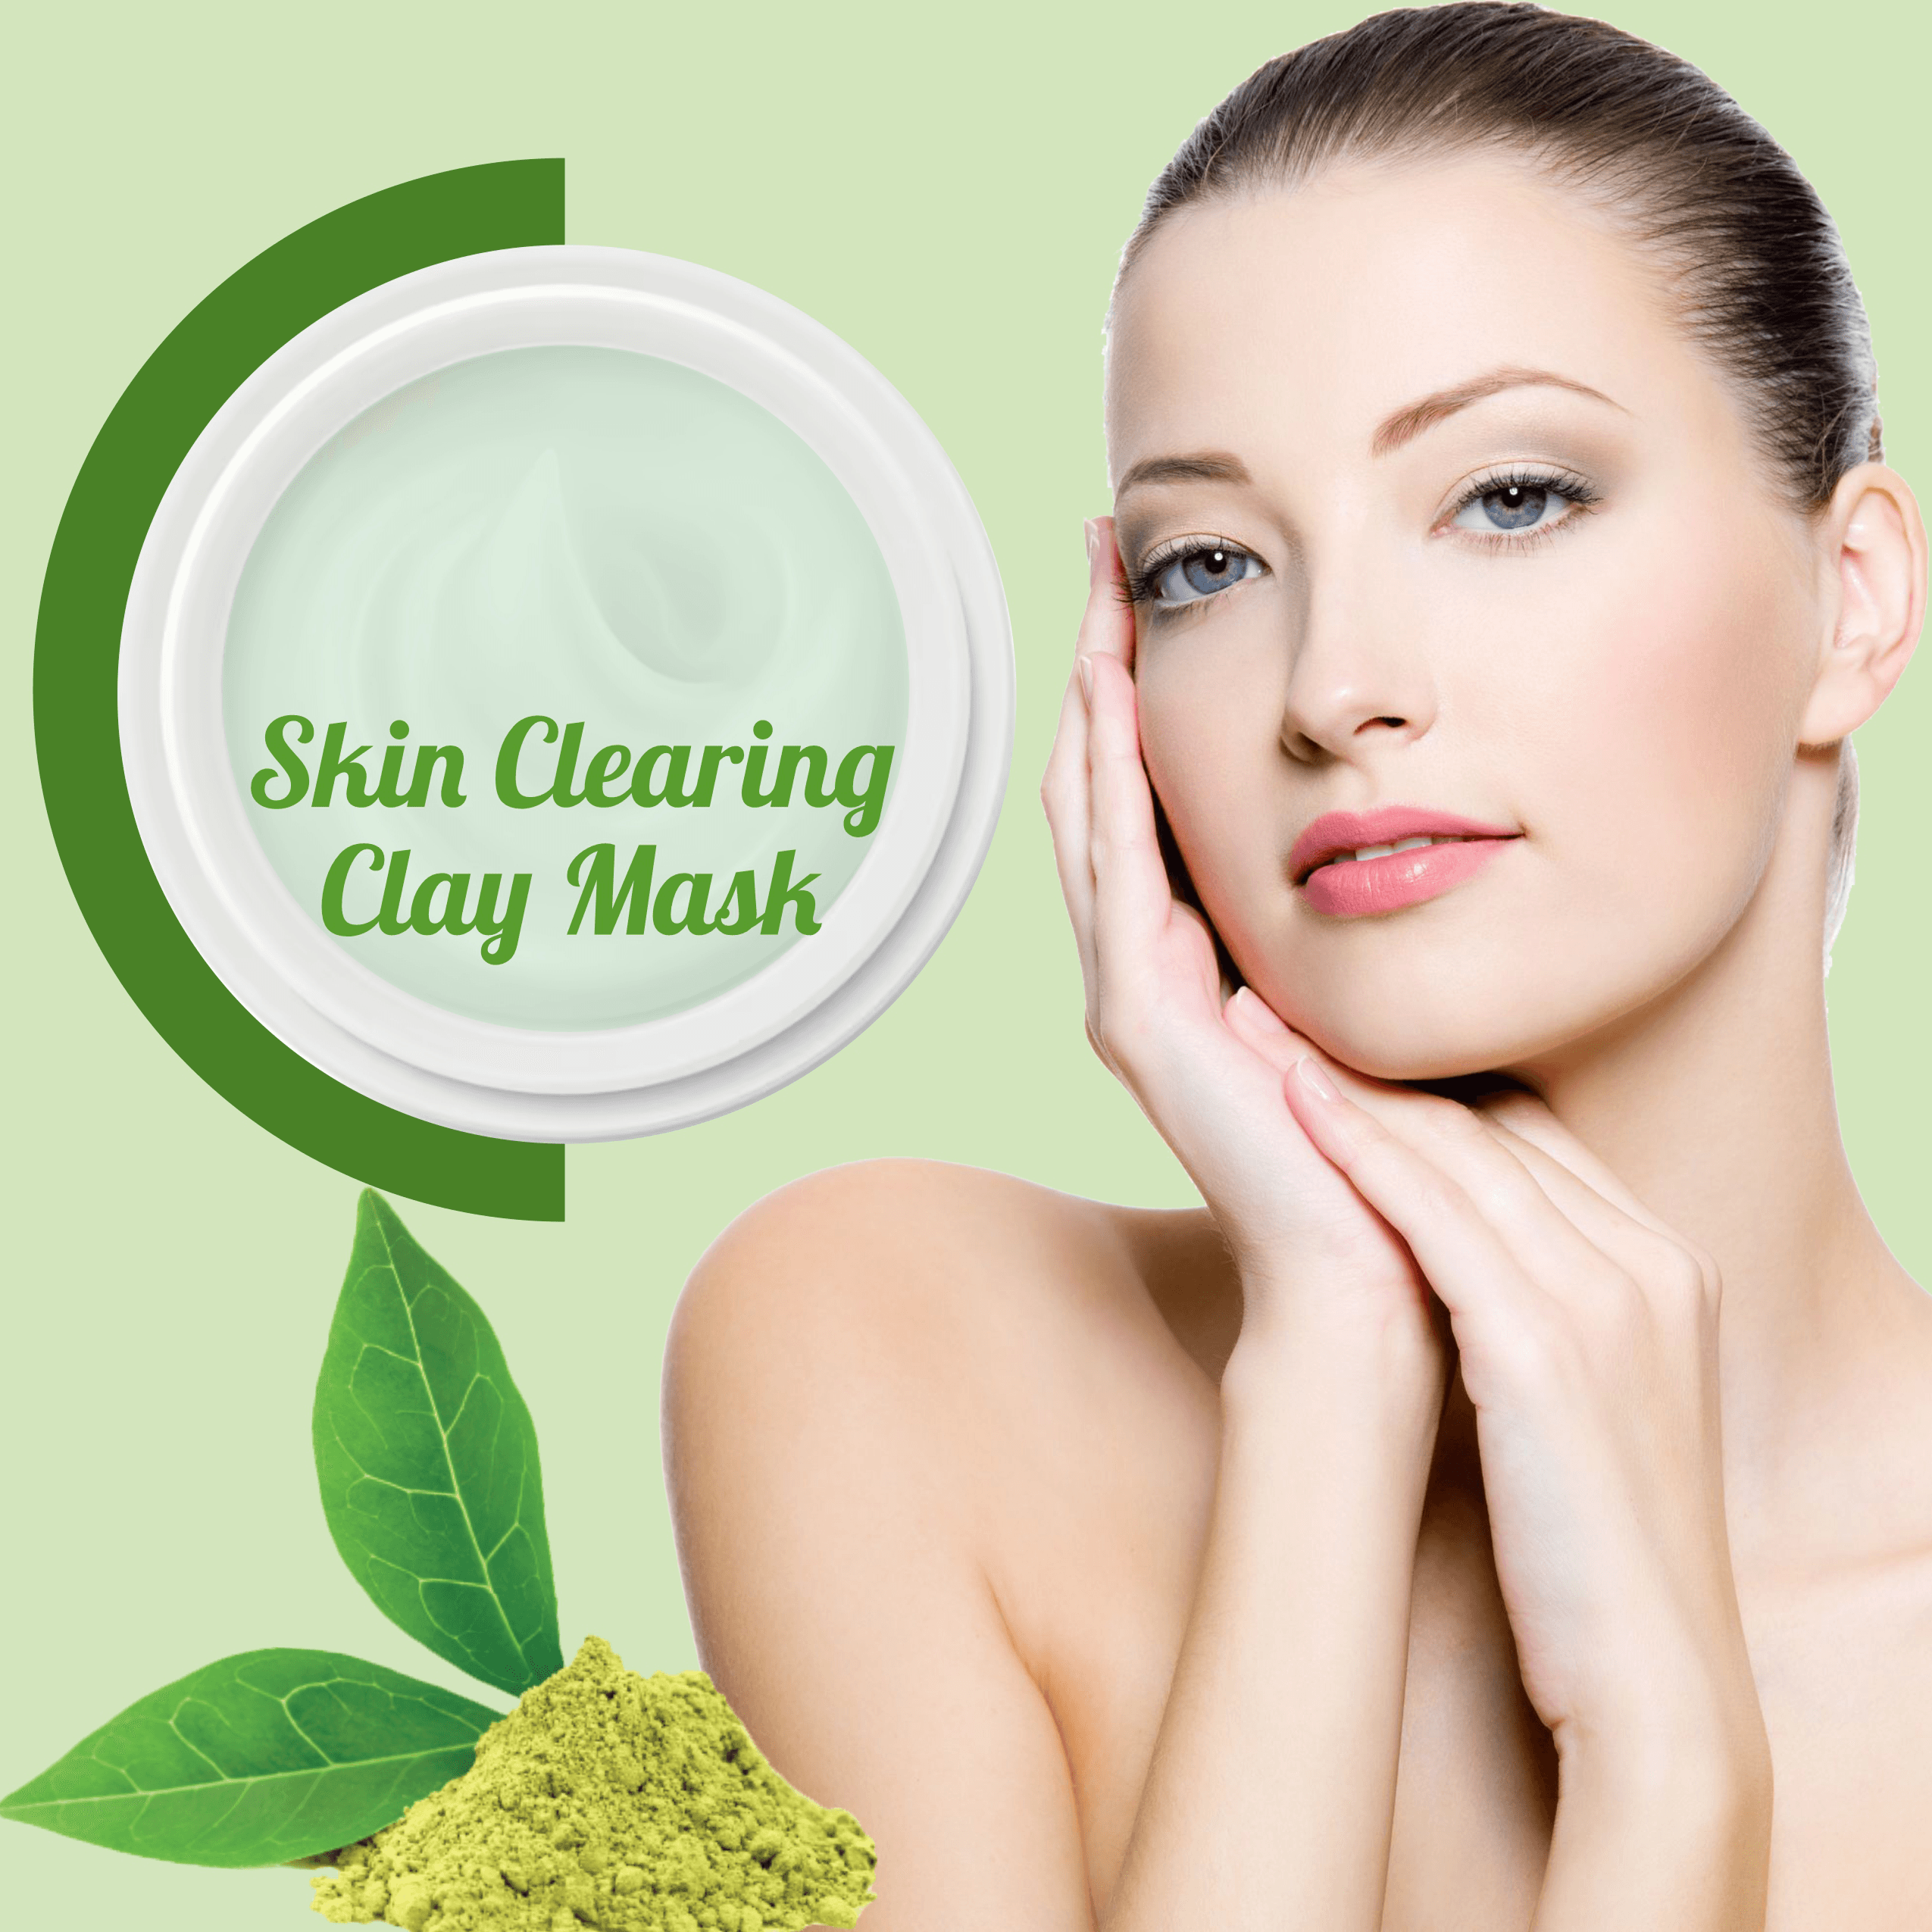 Tea Tree Skin Clearing Clay Mask 100gm - Pink Root